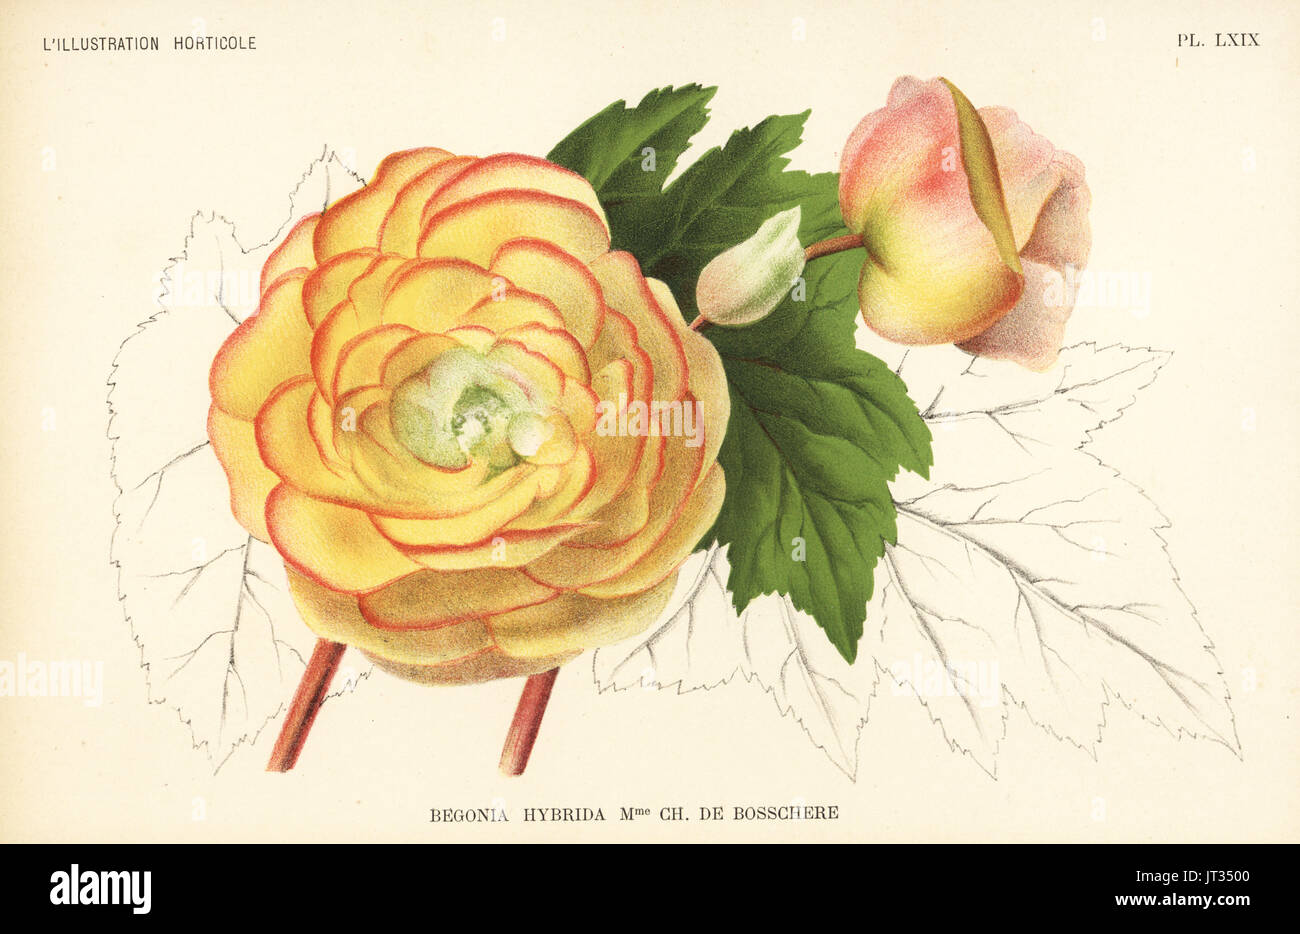 Begonia hybrid, Madame Charles de Bosschere, raised by F. Crousse of Nancy. Chromolithograph by Pieter de Pannemaeker after an illustration by J. de Pannemaeker from Jean Linden's l'Illustration Horticole, Brussels, 1896. Stock Photo